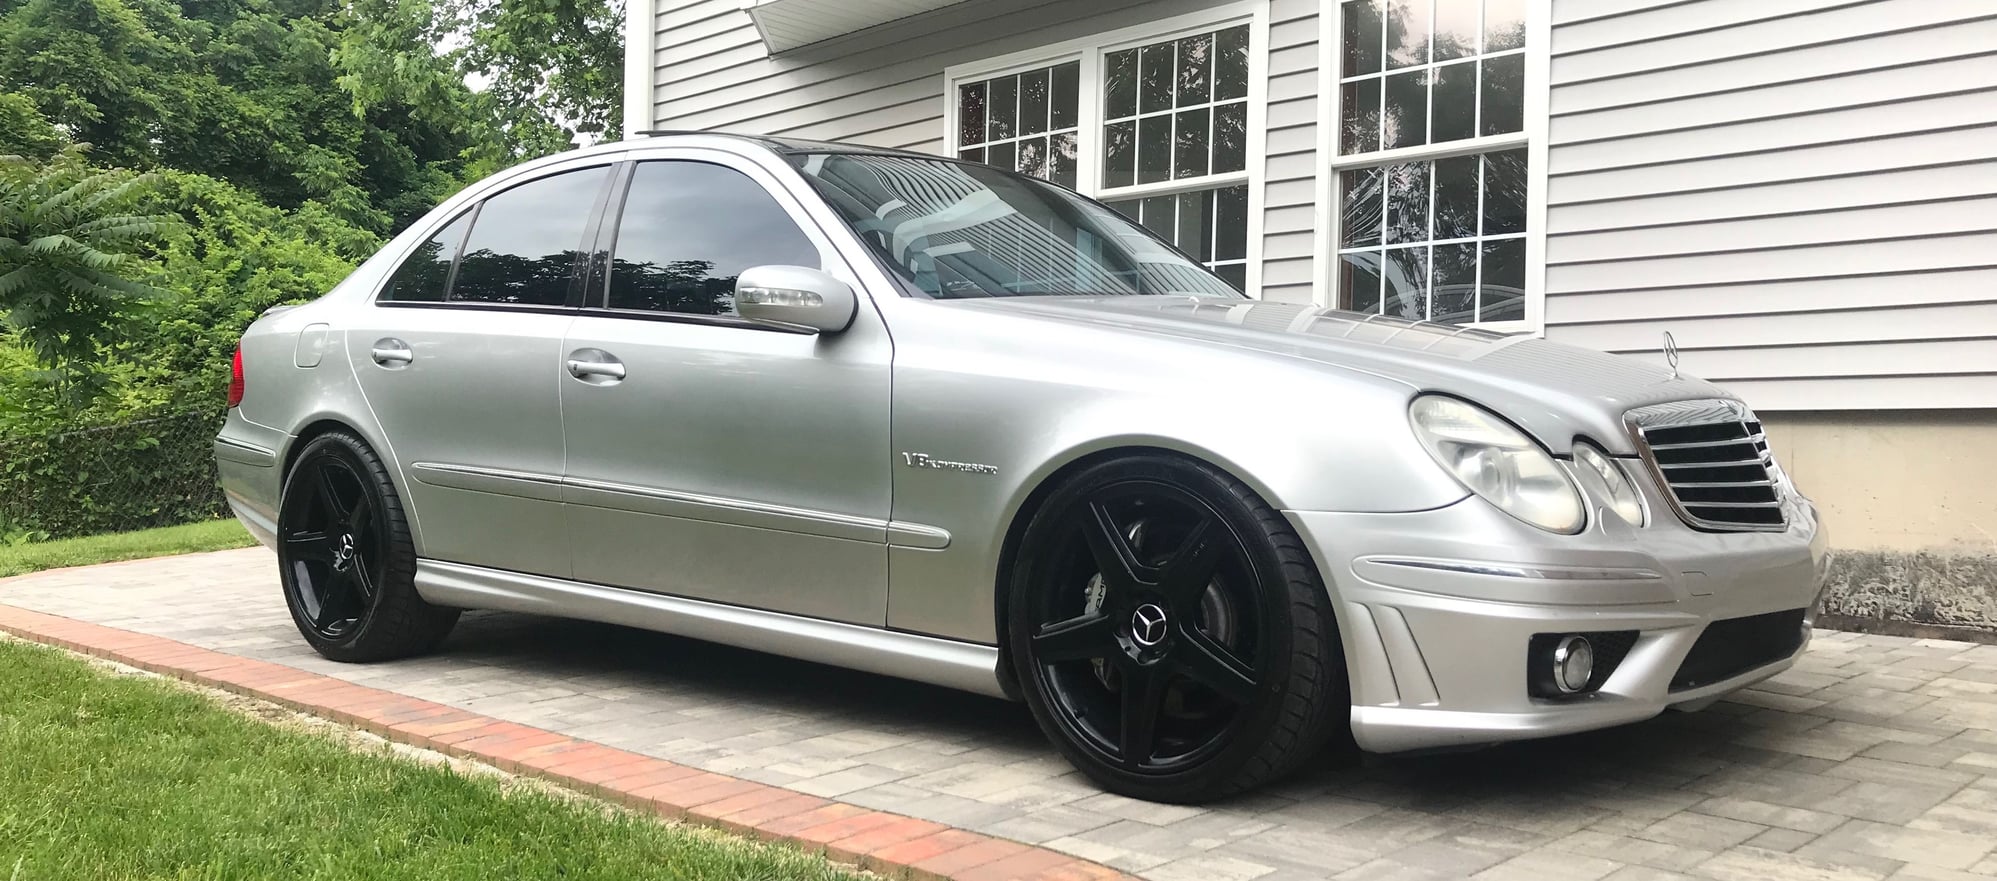 2004 Mercedes-Benz E55 AMG - 2004 MB E55 WEISTEC!!!! - Used - VIN WDBUF76J04A404102 - 124,250 Miles - 8 cyl - 2WD - Automatic - Sedan - Silver - New Haven, CT 06511, United States